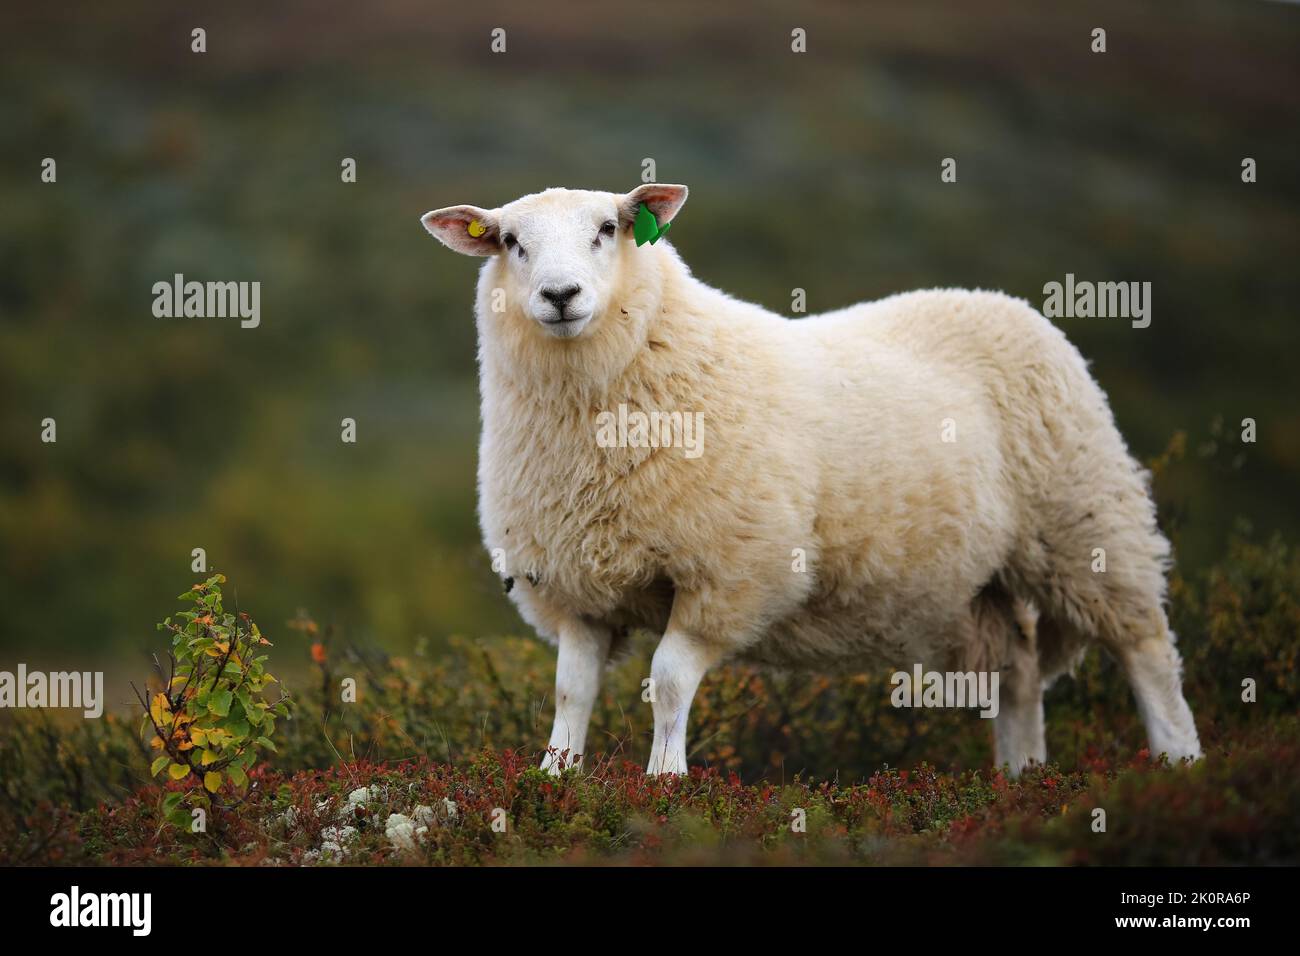 Norwegian white sheep in the mountains in the autumn Stock Photo